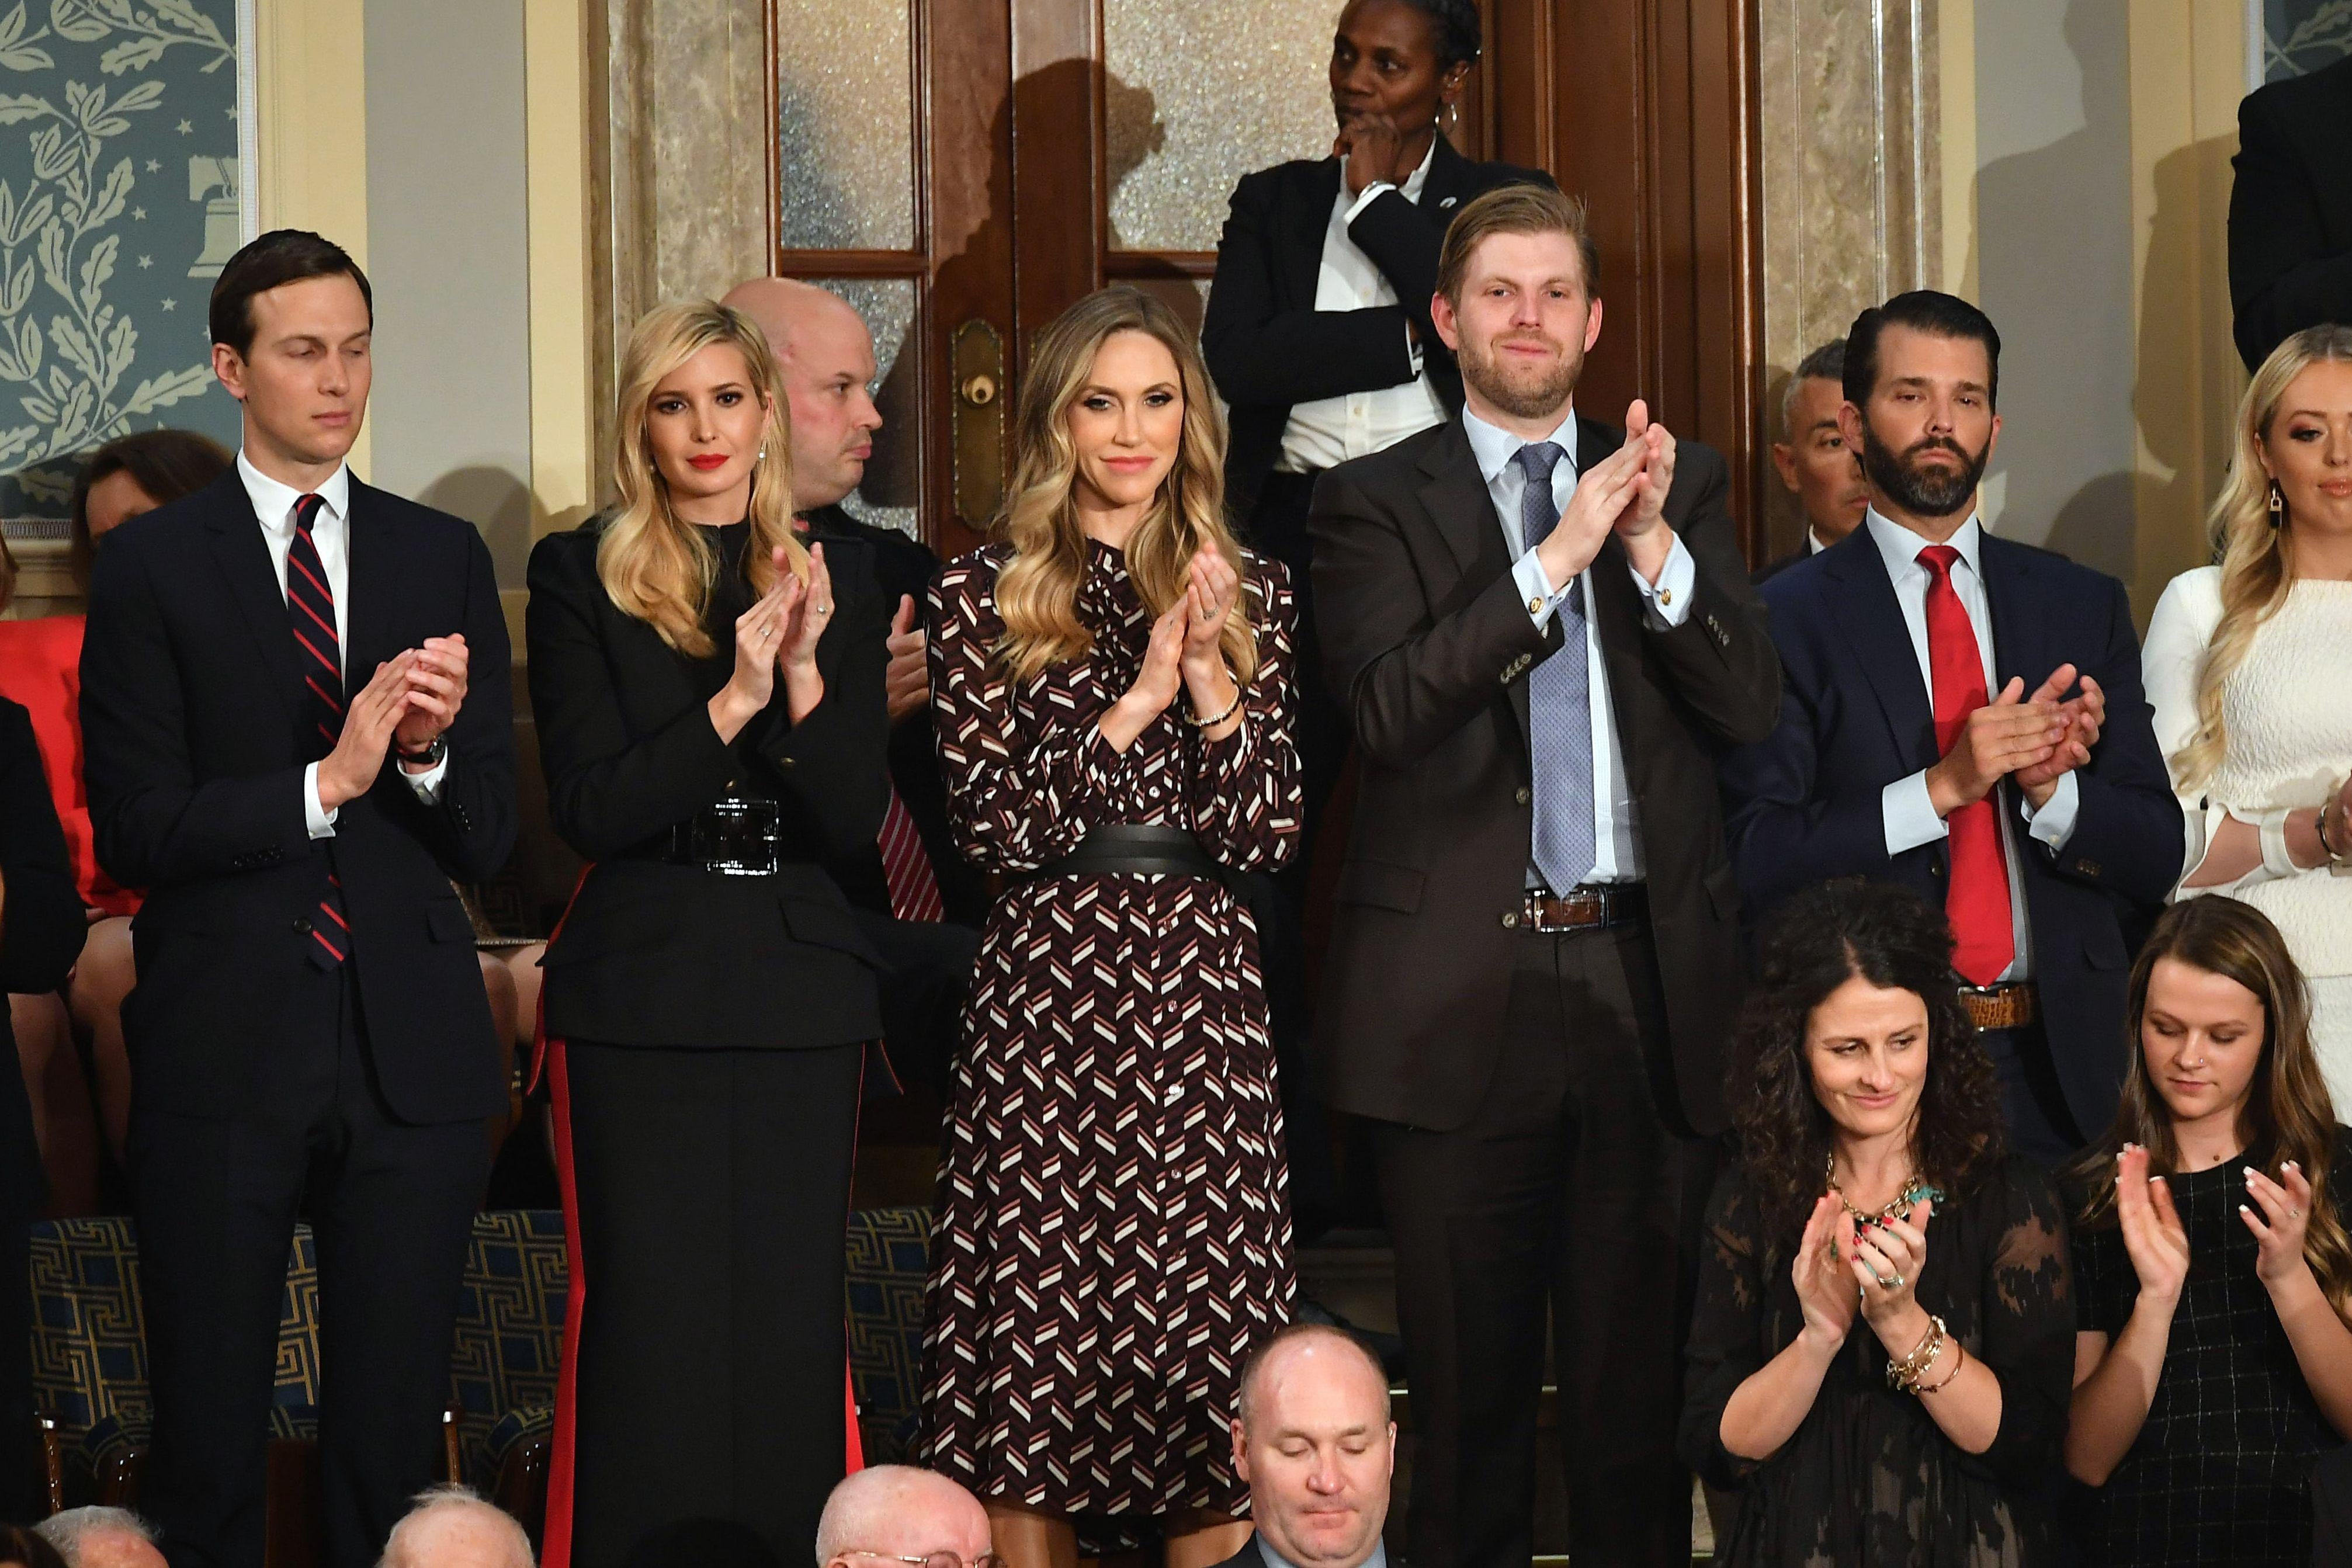  Jared Kushner, Ivanka Trump, Eric Trump, and Donald Trump, Jr., stand and applaud during a state of the union address.